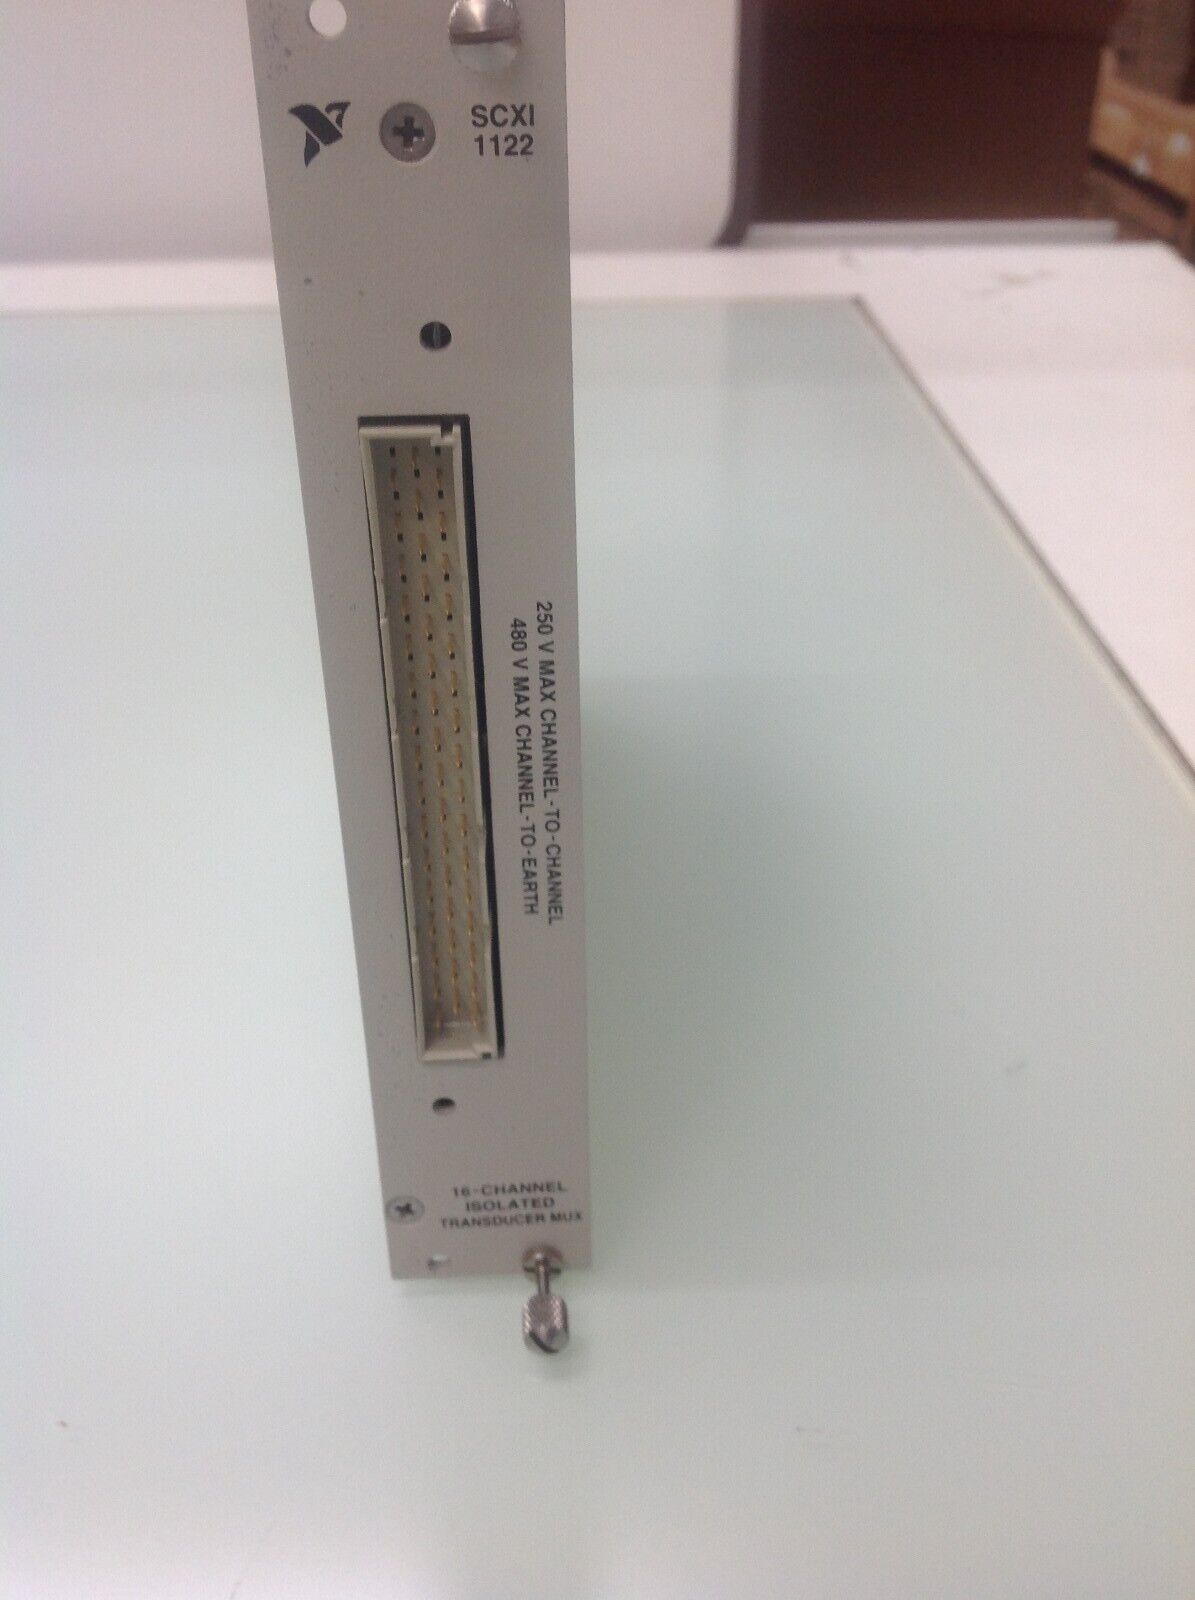 National Instruments NI SCXI-1122 16 Channel Isolated Transducer Mux. Sold as is